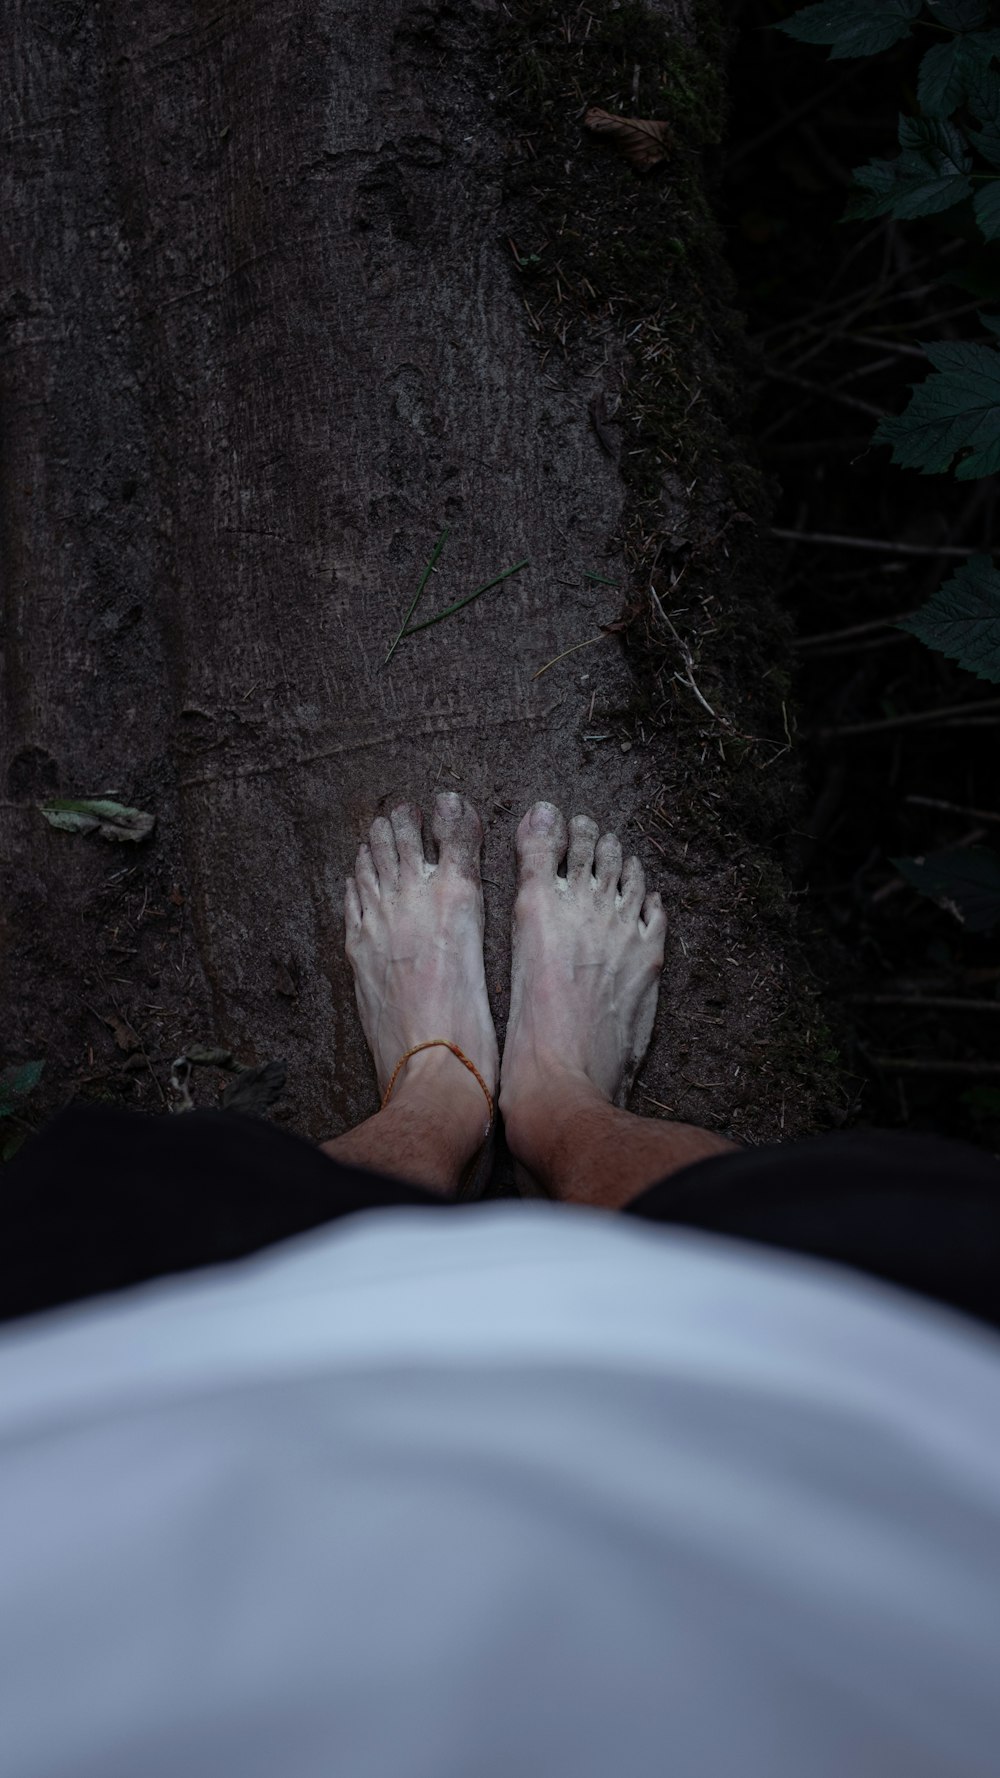 a person's bare feet and bare toe on the ground